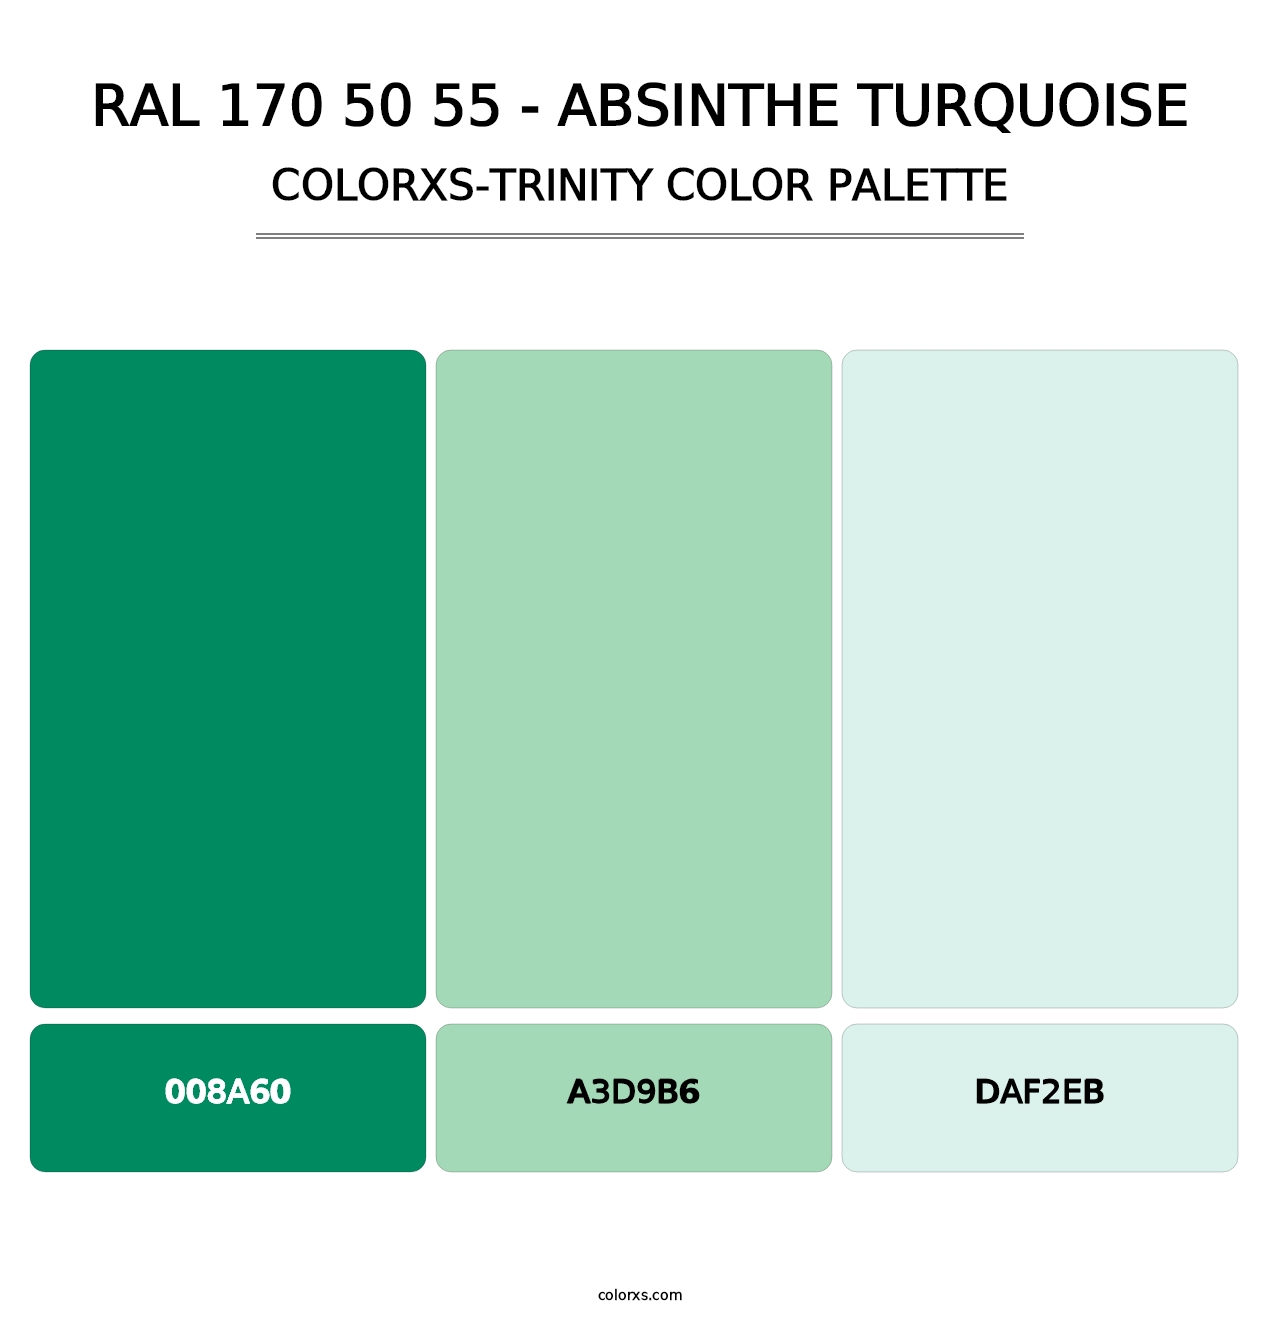 RAL 170 50 55 - Absinthe Turquoise - Colorxs Trinity Palette